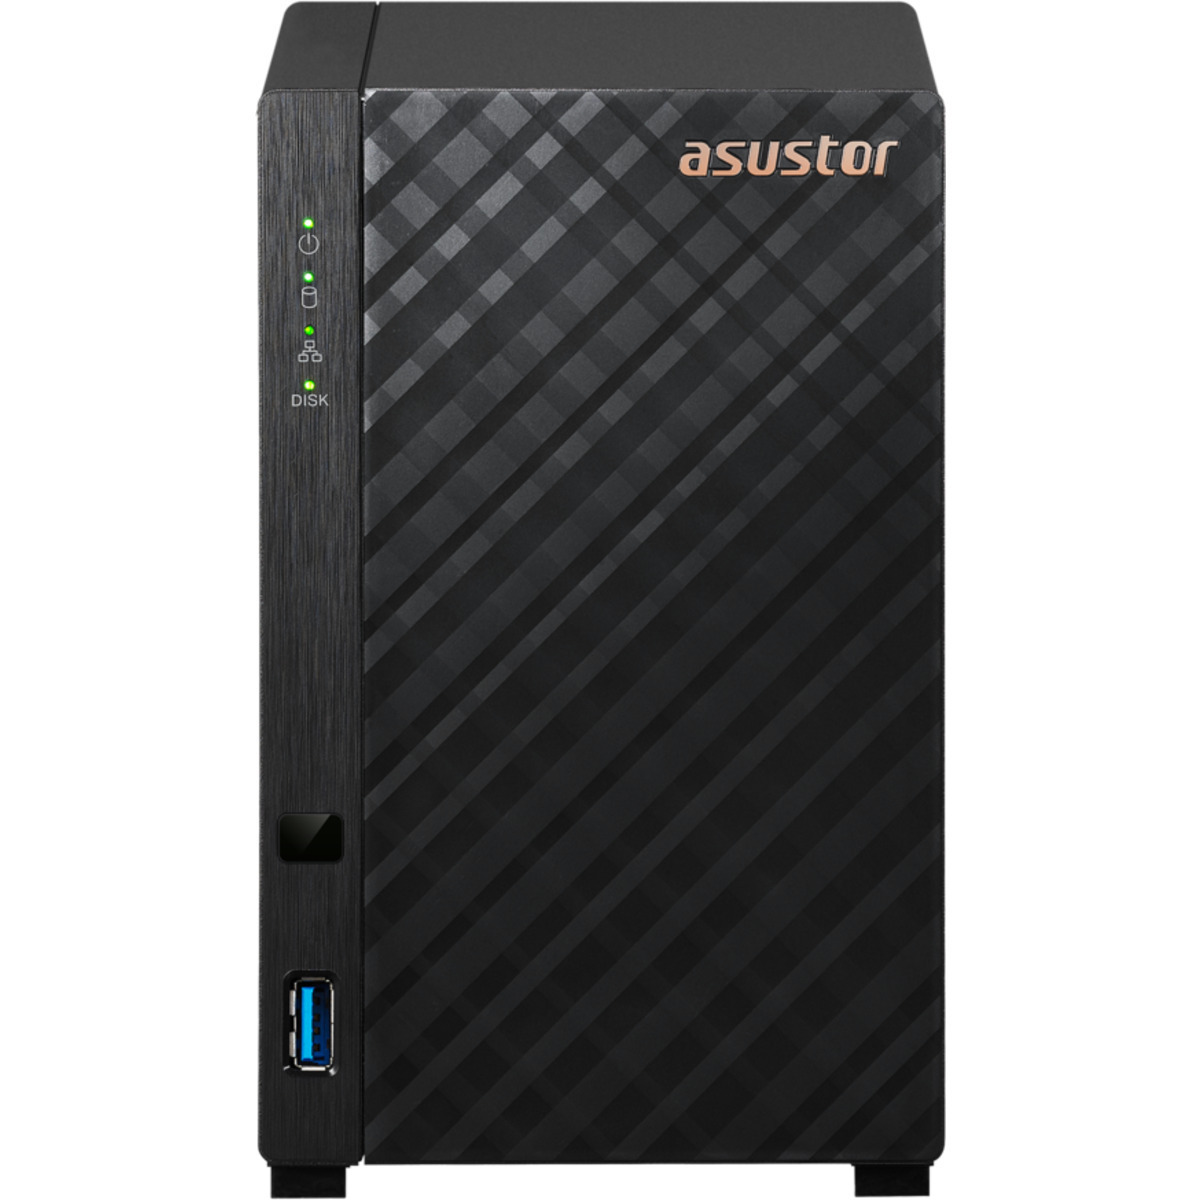 ASUSTOR DRIVESTOR 2 Lite AS1102TL 6tb 2-Bay Desktop Personal / Basic Home / Small Office NAS - Network Attached Storage Device 1x6tb Seagate IronWolf ST6000VN006 3.5 5400rpm SATA 6Gb/s HDD NAS Class Drives Installed - Burn-In Tested DRIVESTOR 2 Lite AS1102TL